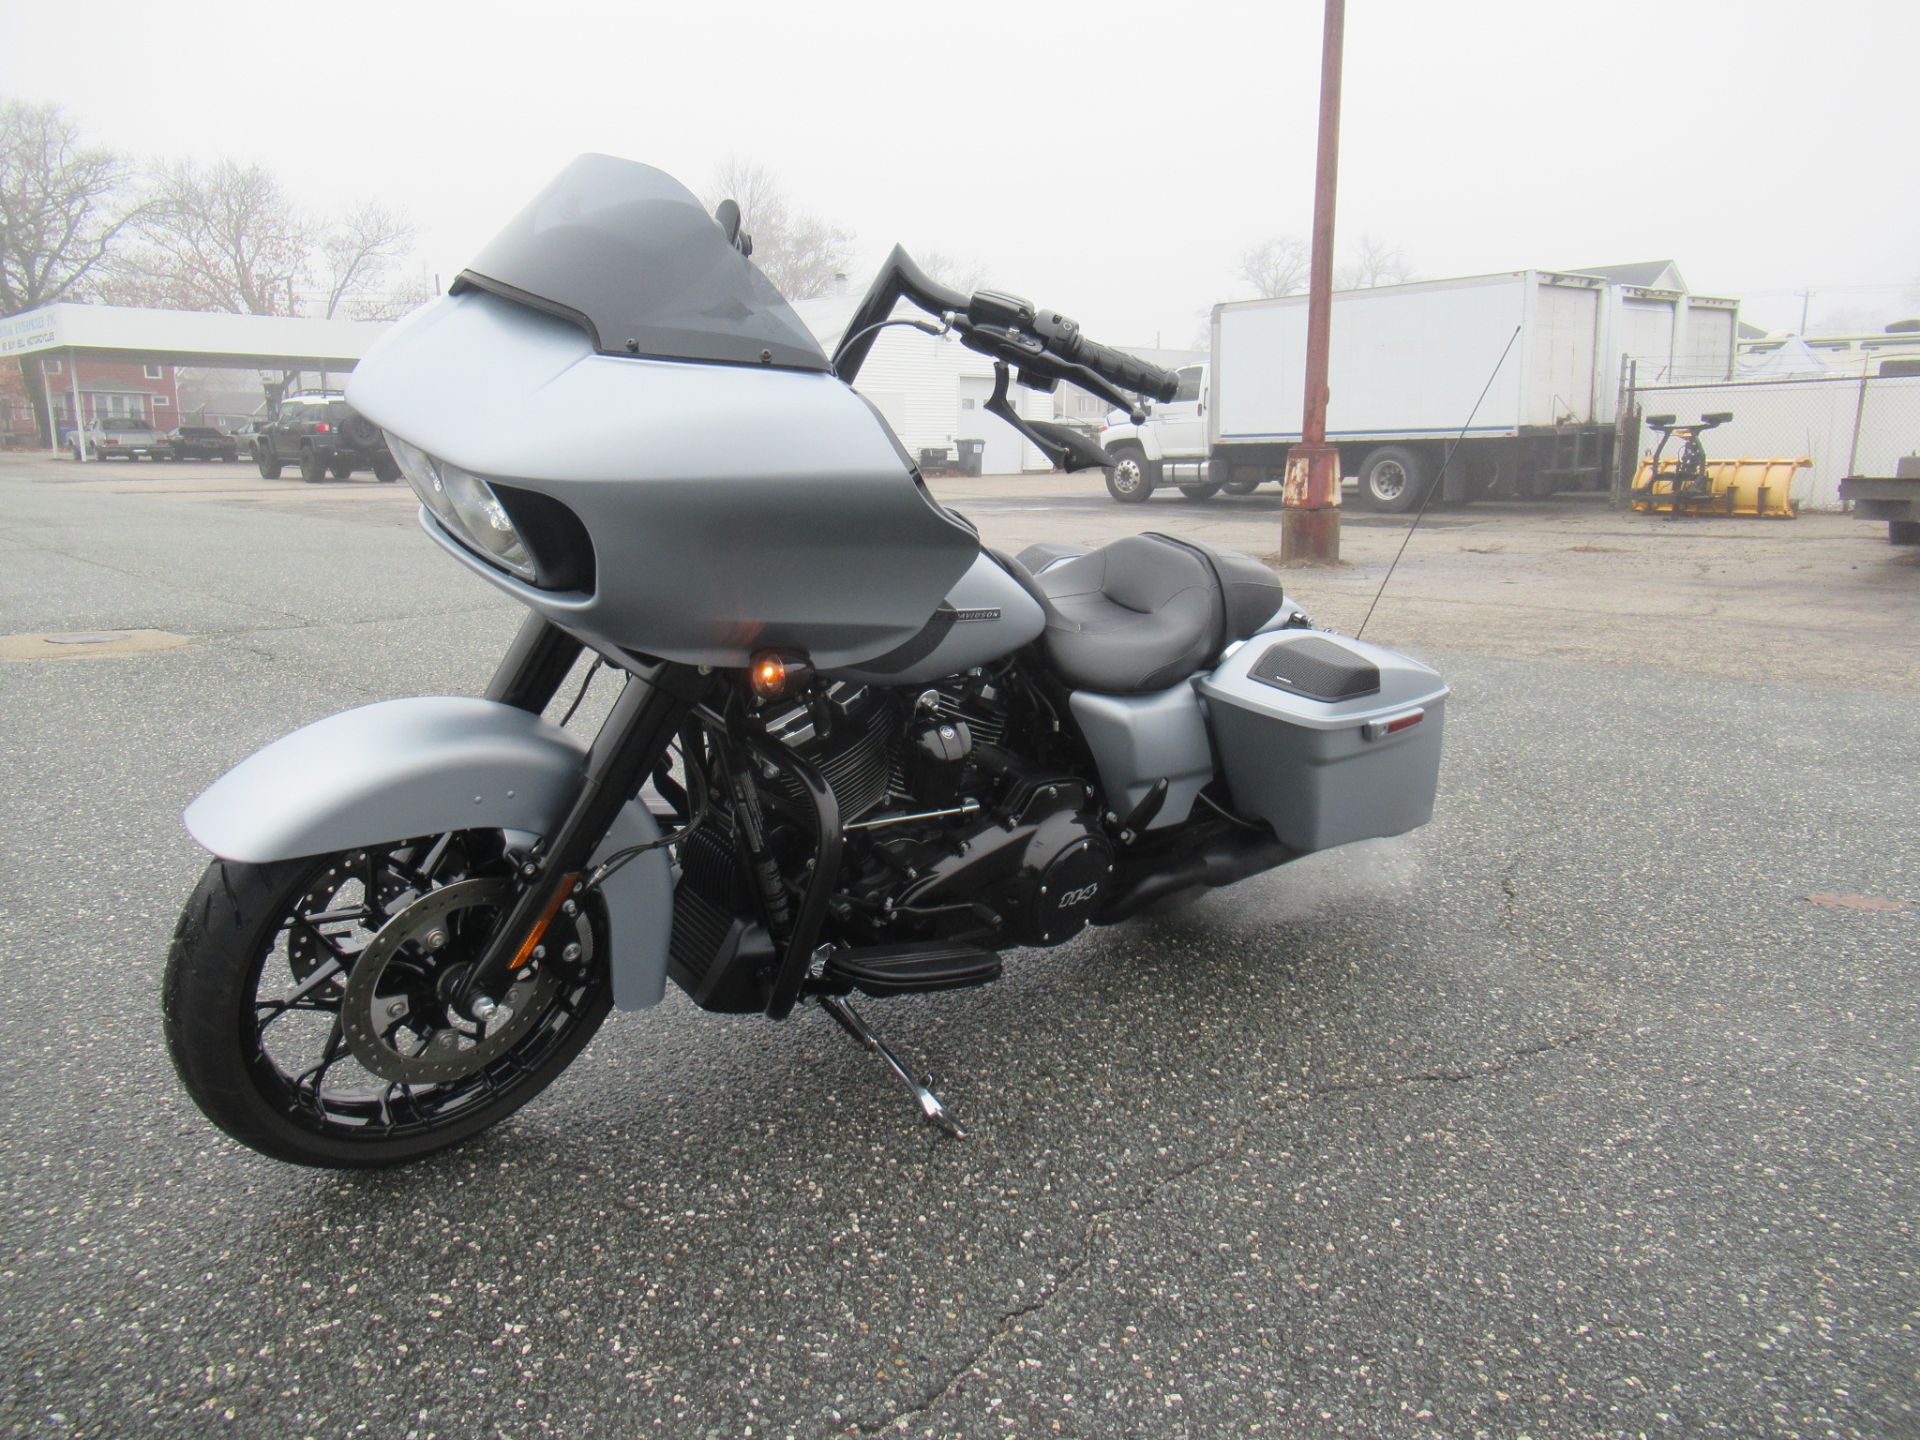 2020 Harley-Davidson Road Glide® Special in Springfield, Massachusetts - Photo 6